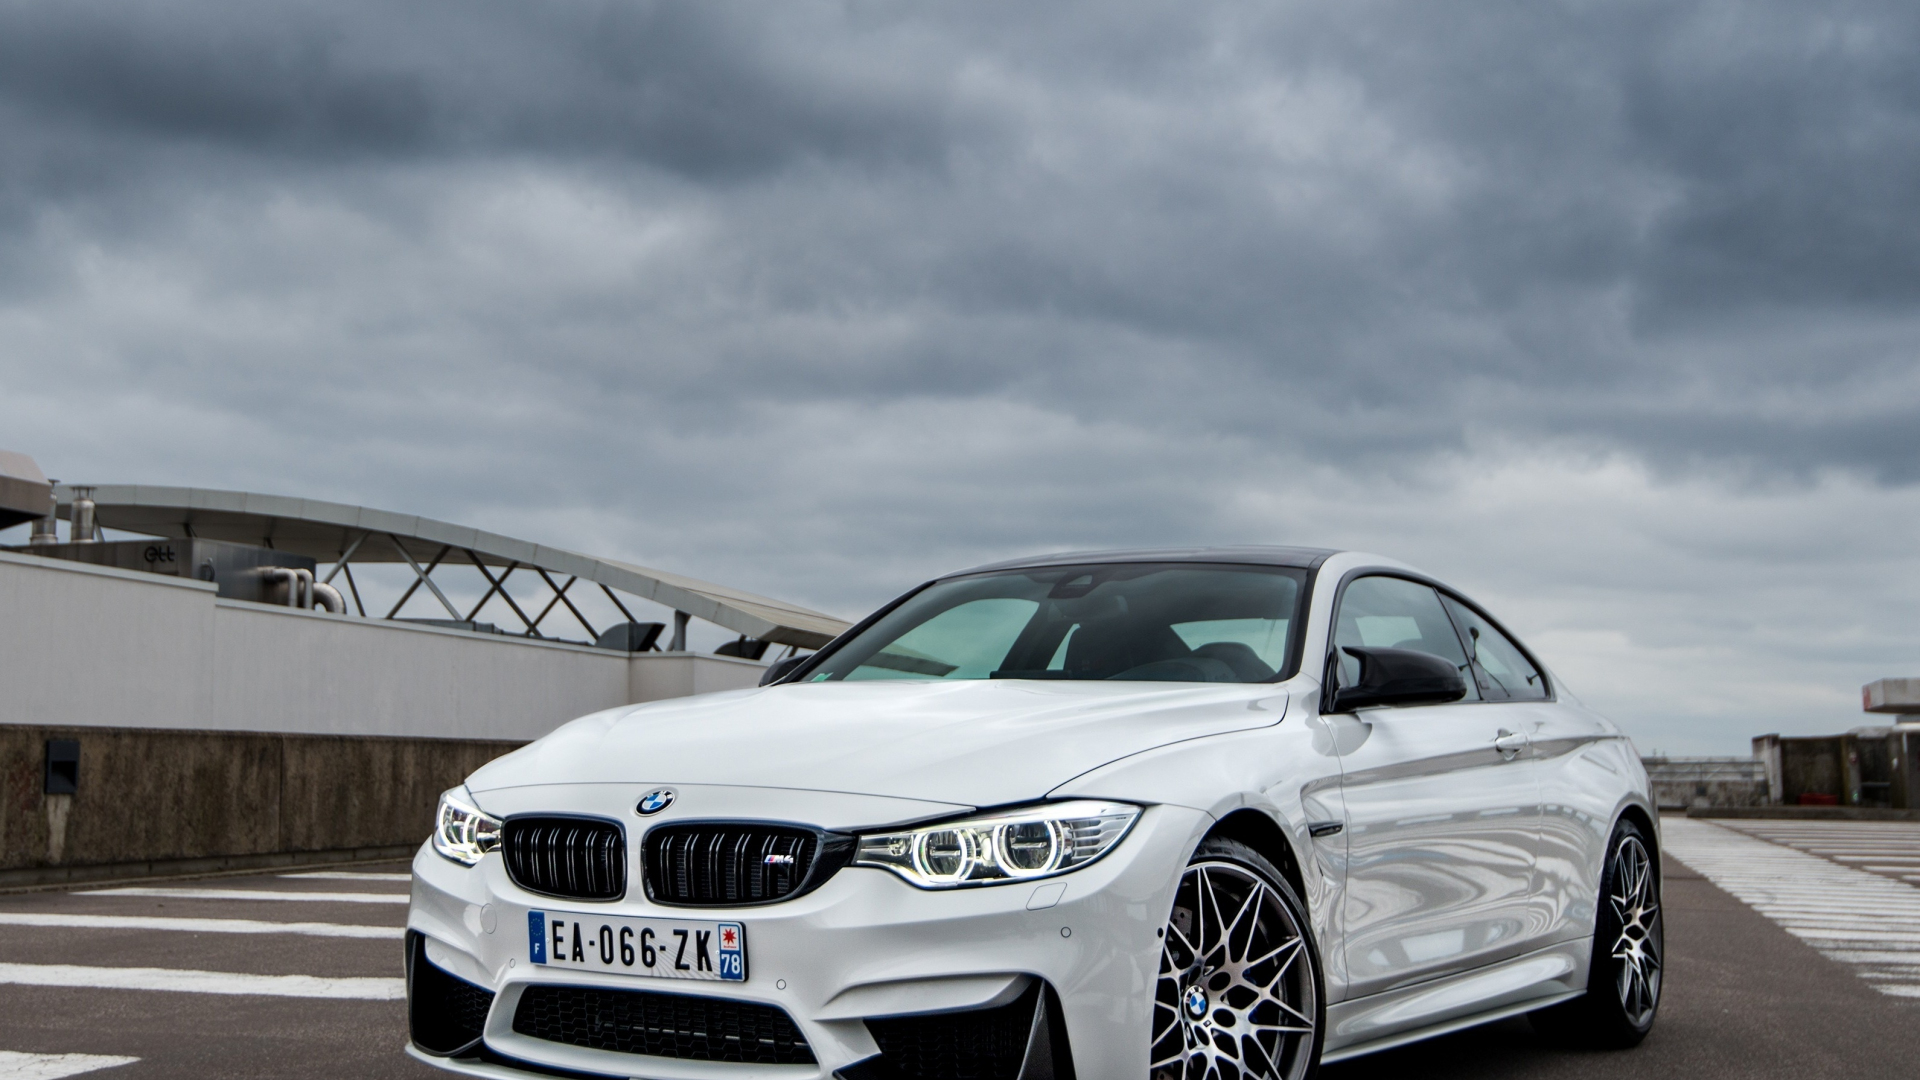 Download 19x1080 Wallpaper Bmw M4 White Car Front Full Hd Hdtv Fhd 1080p 19x1080 Hd Image Background 5143